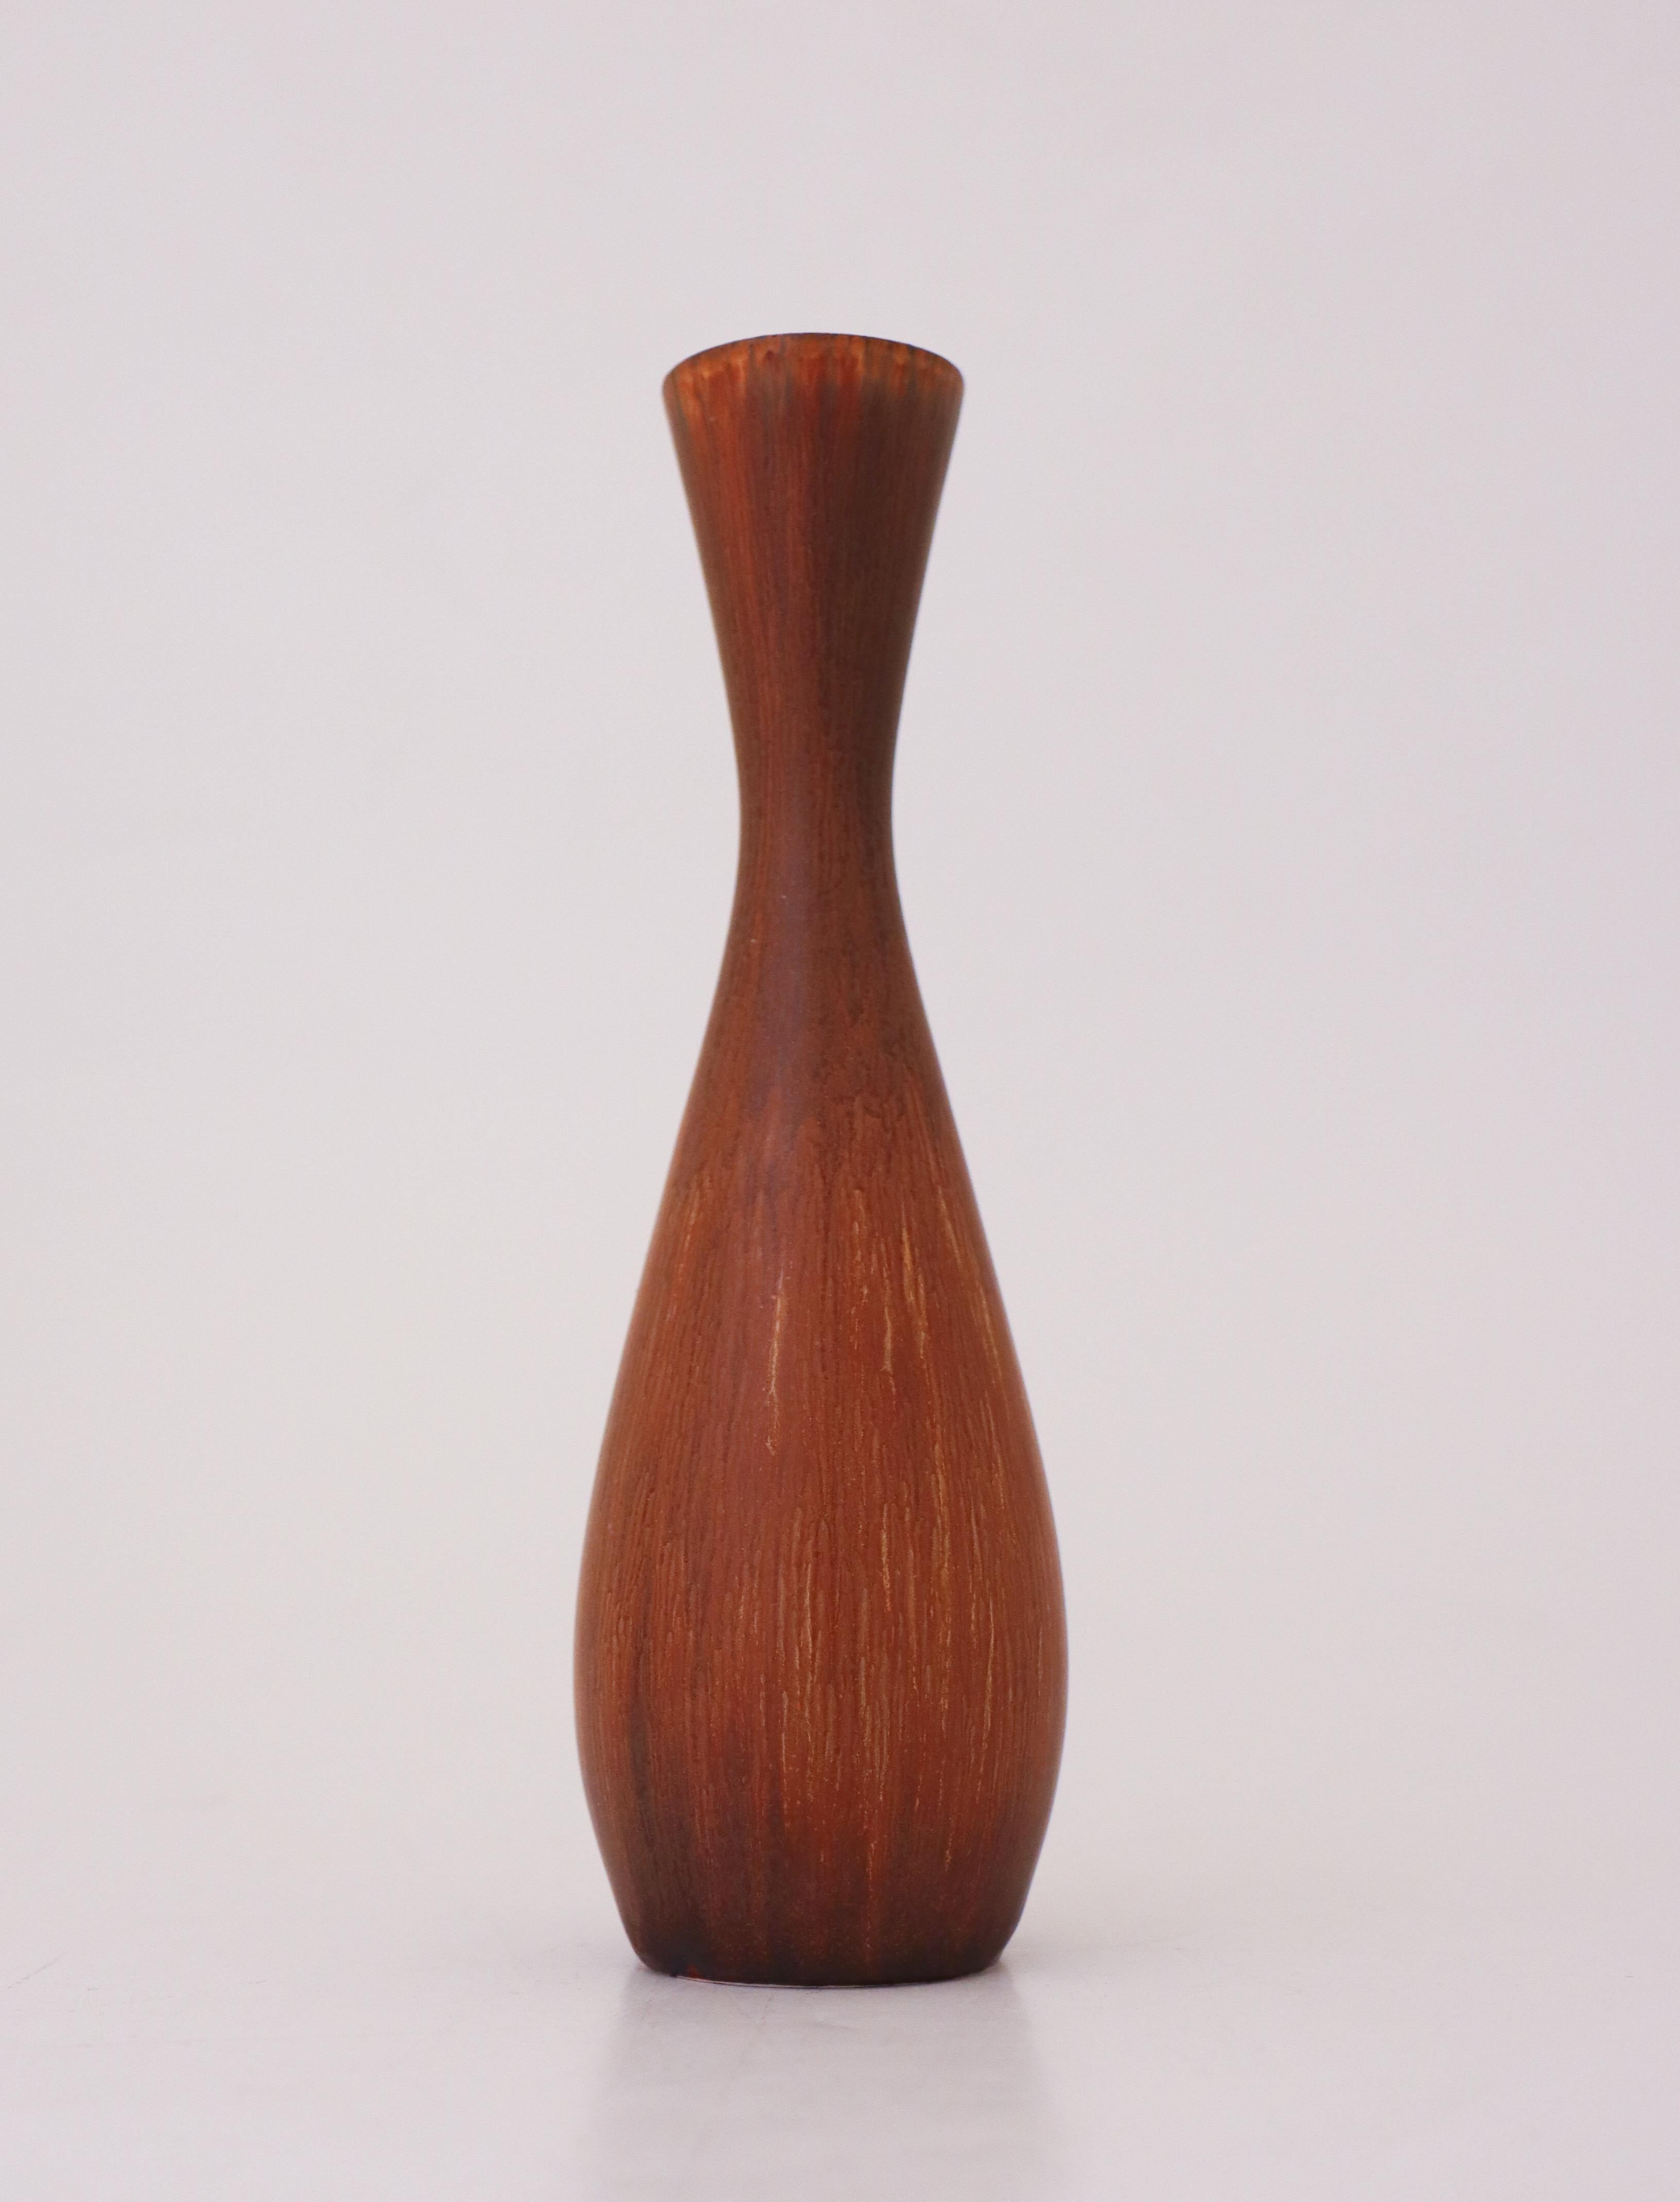 A vase with a brown glaze designed by Carl-Harry Stålhane at Rörstrand, the vase is in excellent condition except from a minor crack below. It is marked as 2nd quality. 

Carl-Harry Stålhane is one of the top names when it comes to Mid century